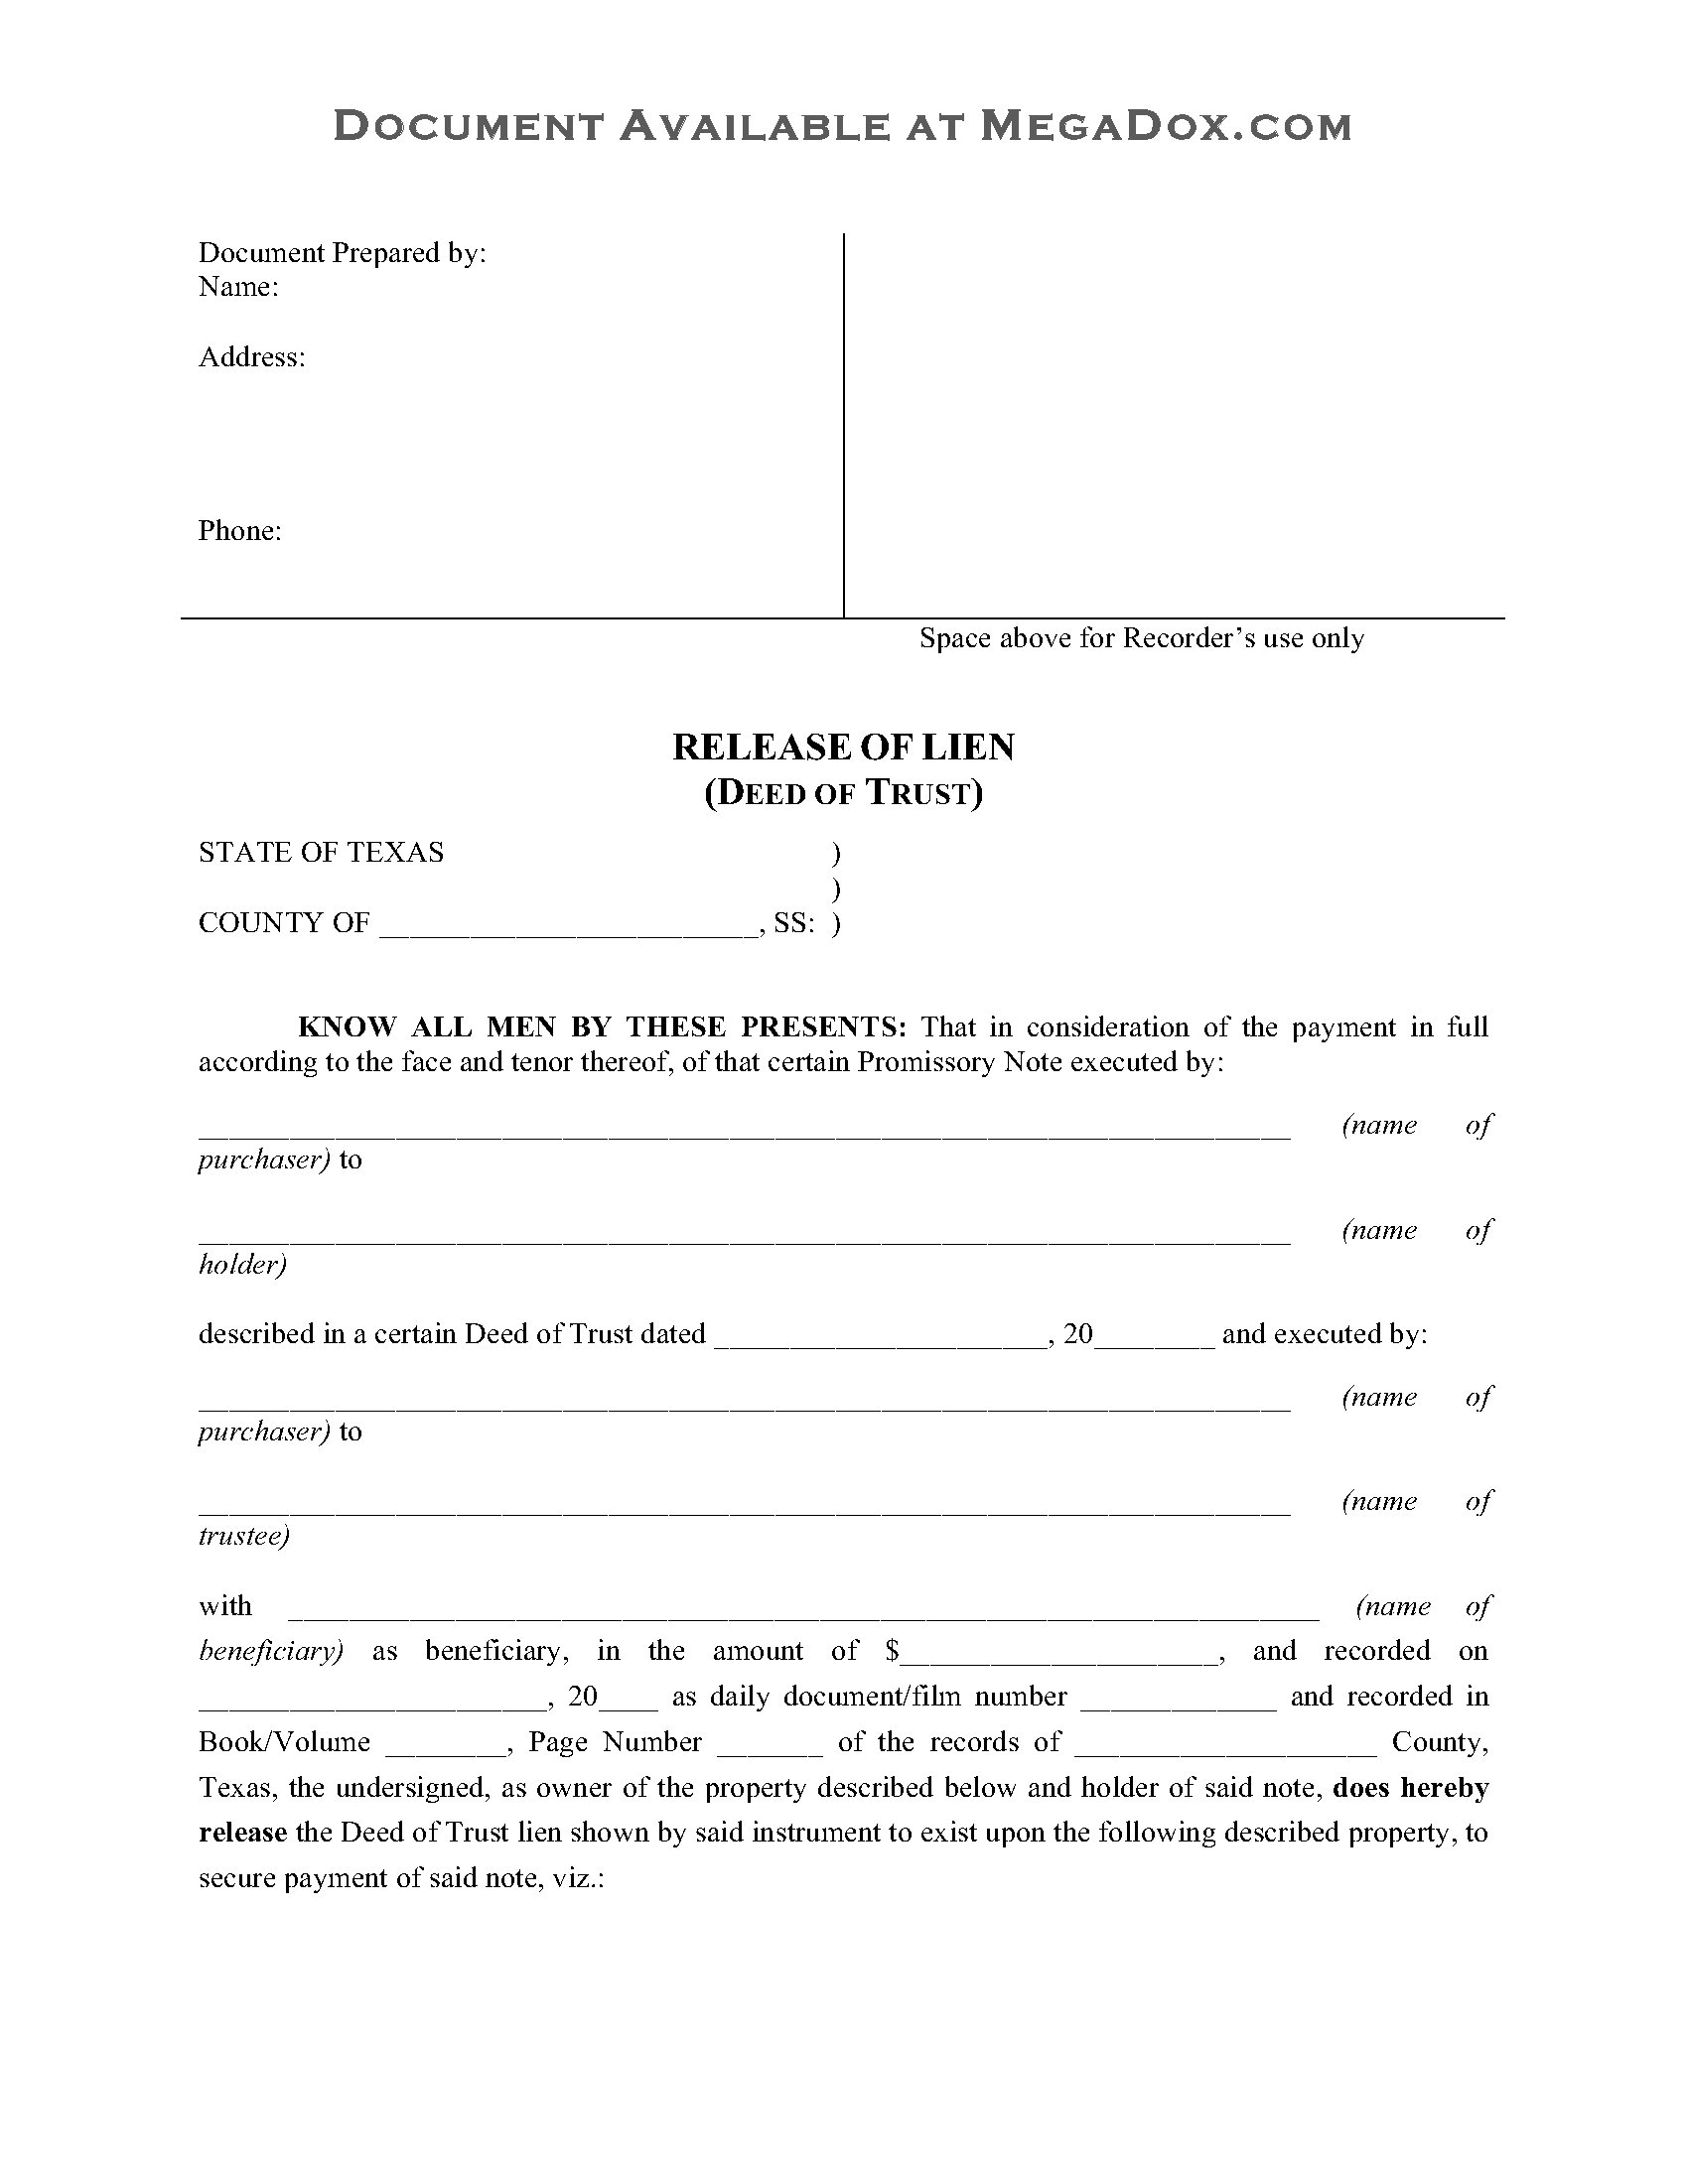 Texas Release Of Deed Of Trust Legal Forms And Business Templates Megadox Com